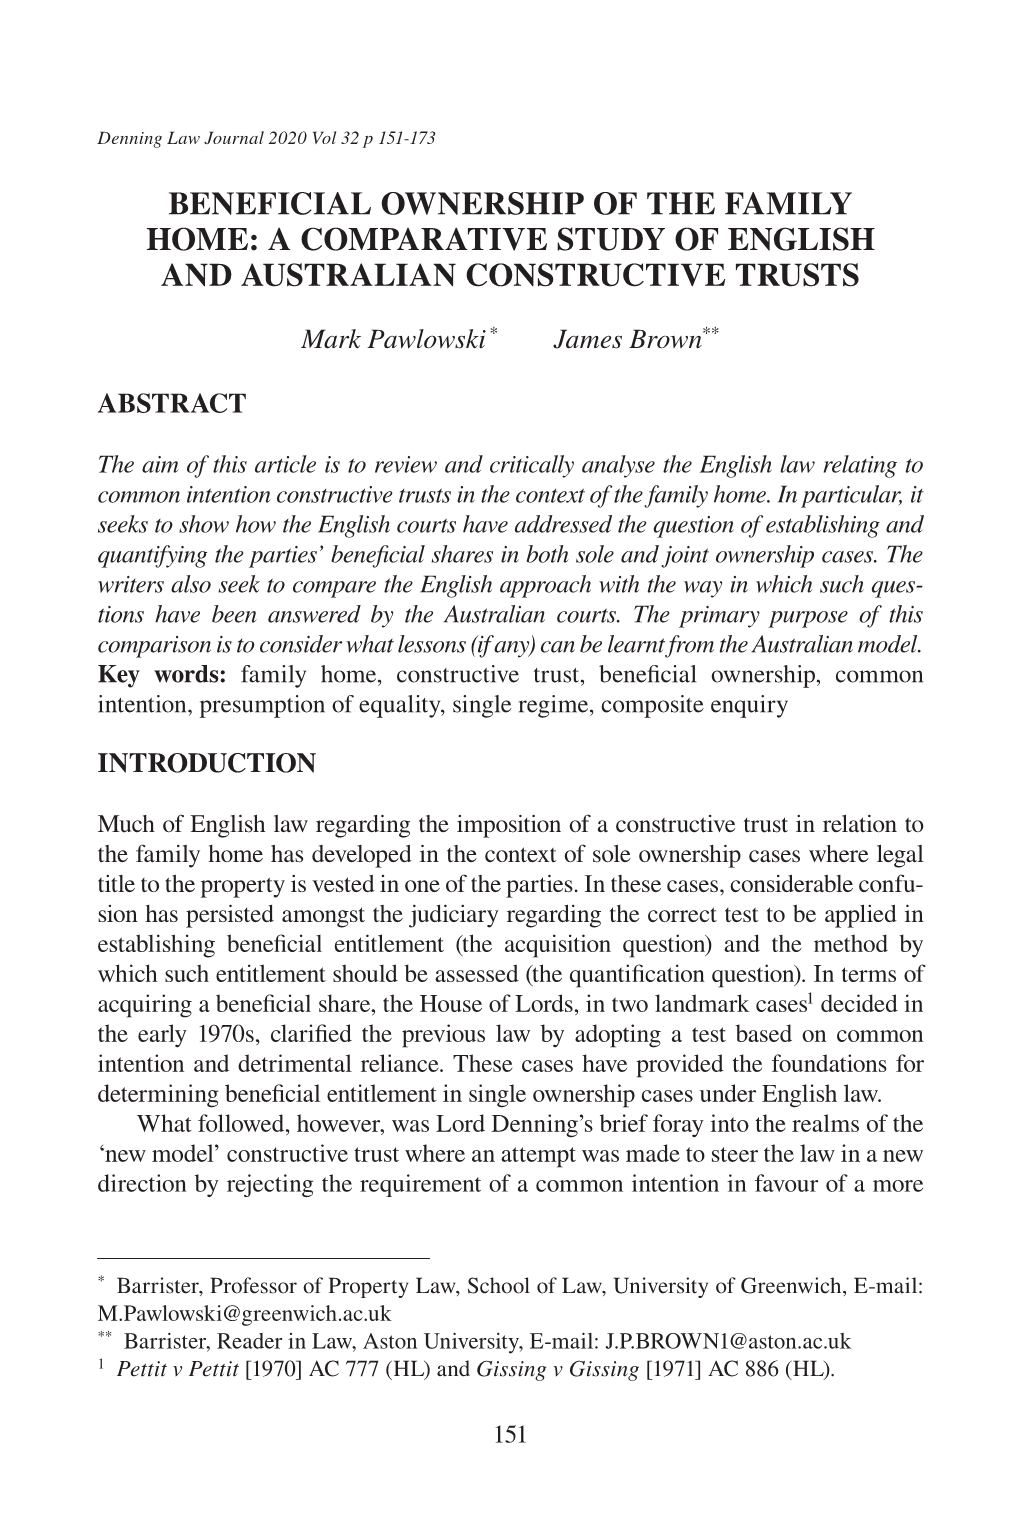 A Comparative Study of English and Australian Constructive Trusts